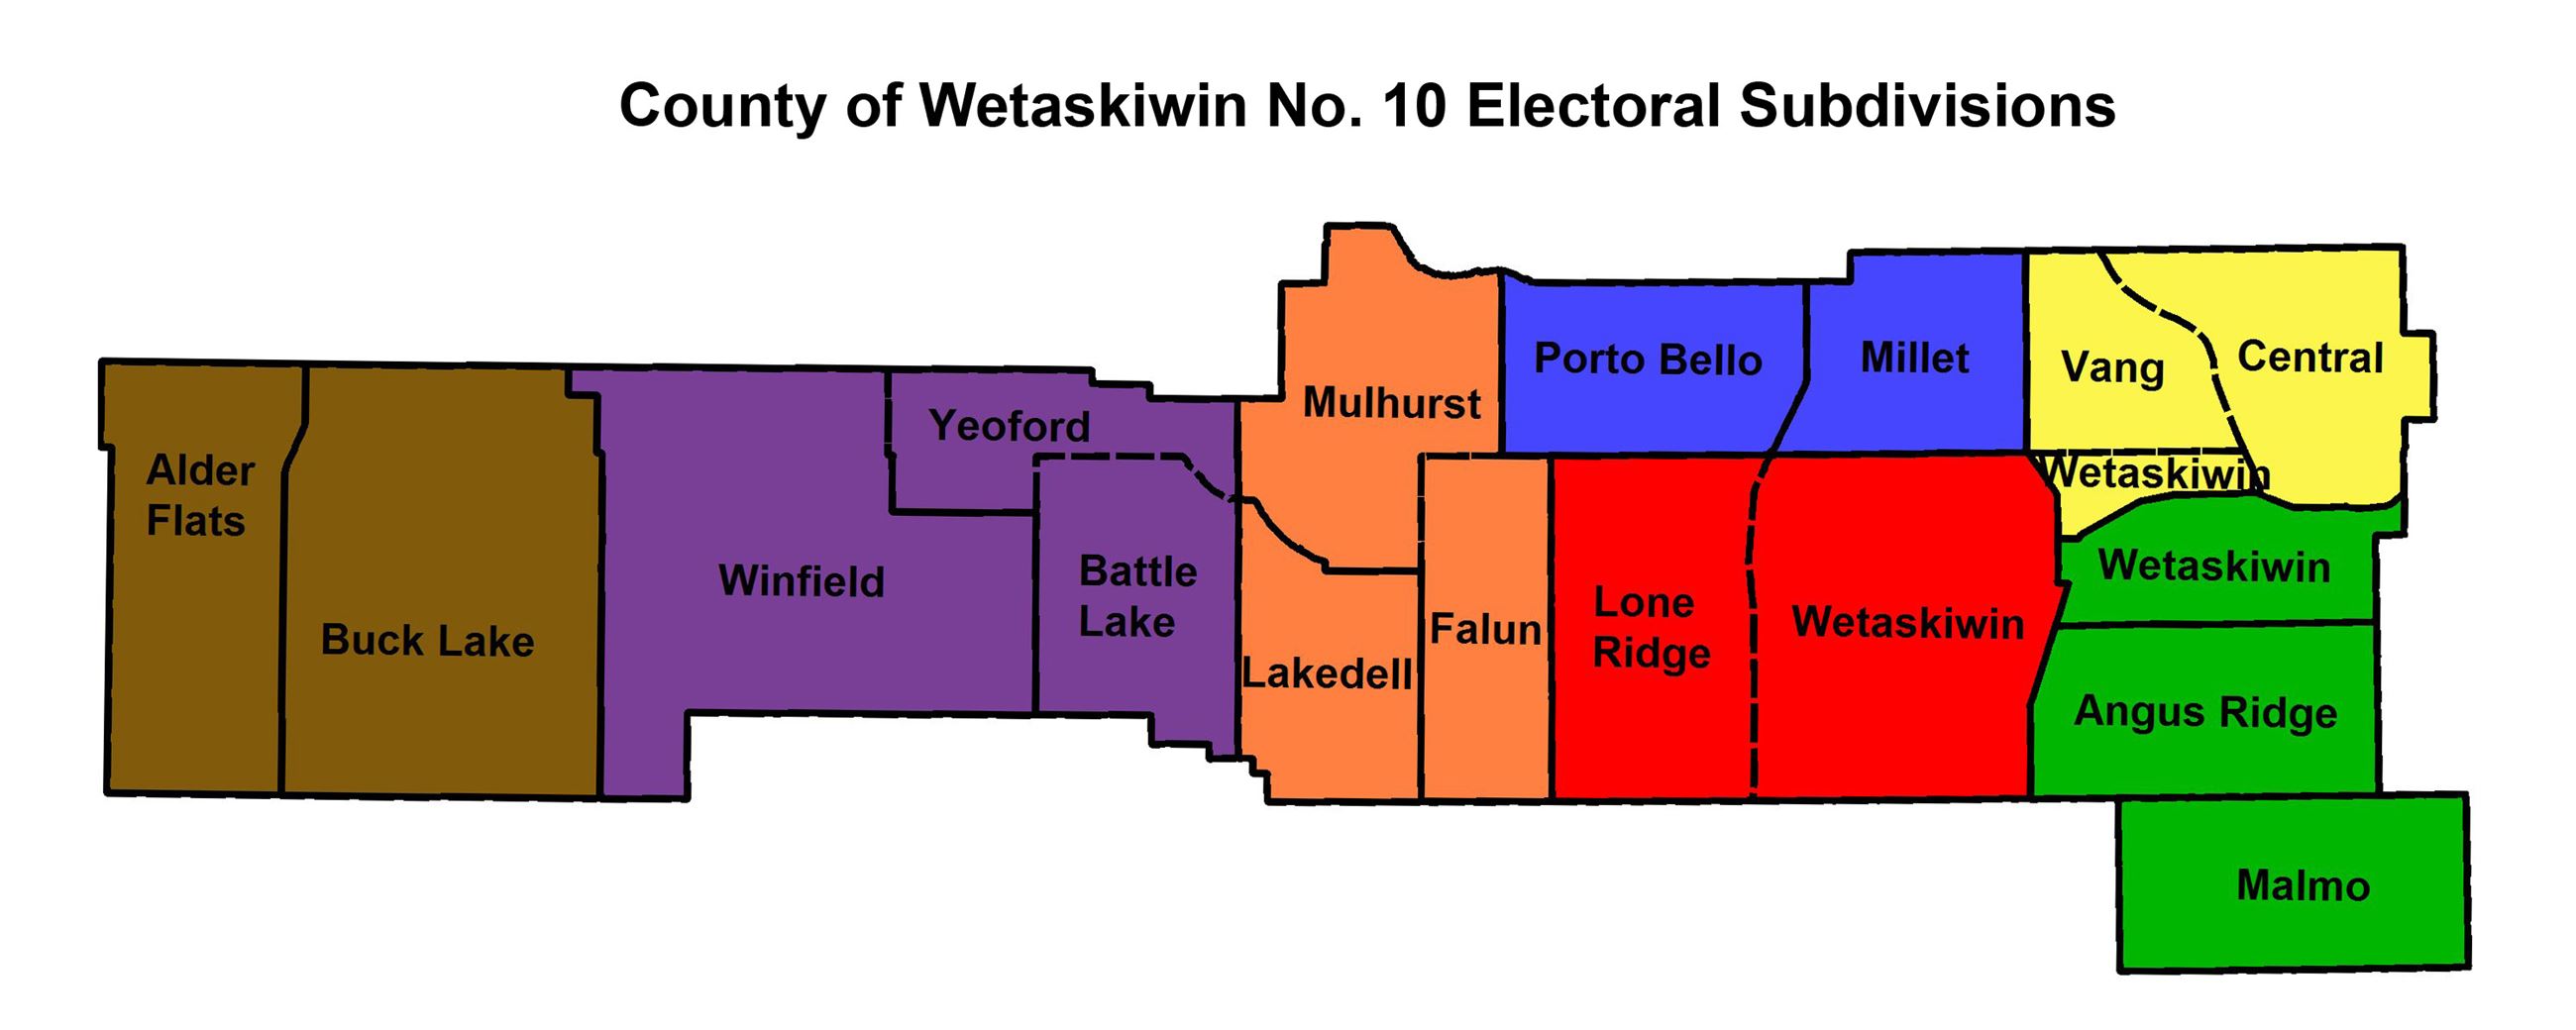 2017 Electoral Division and Subdivision Map